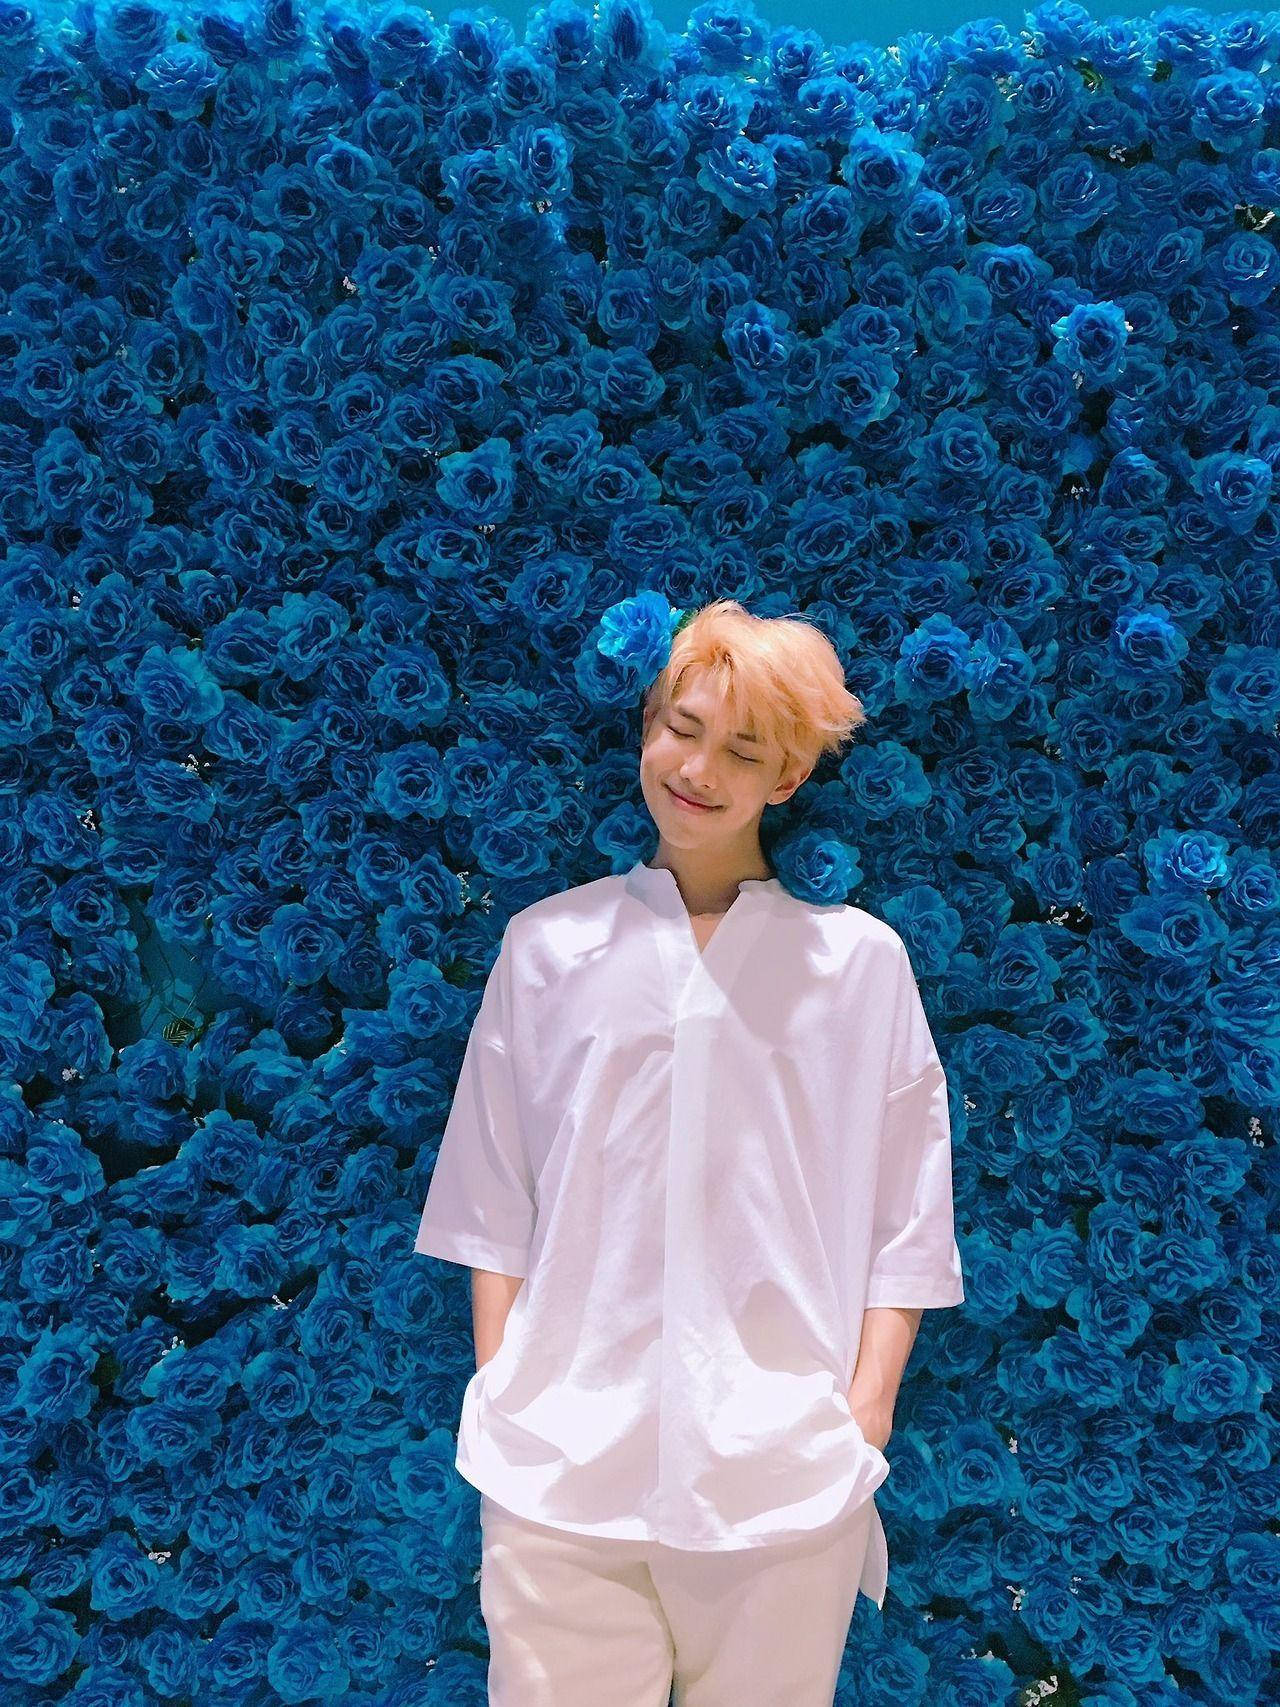 Namjoon Poses With Blue Roses Background